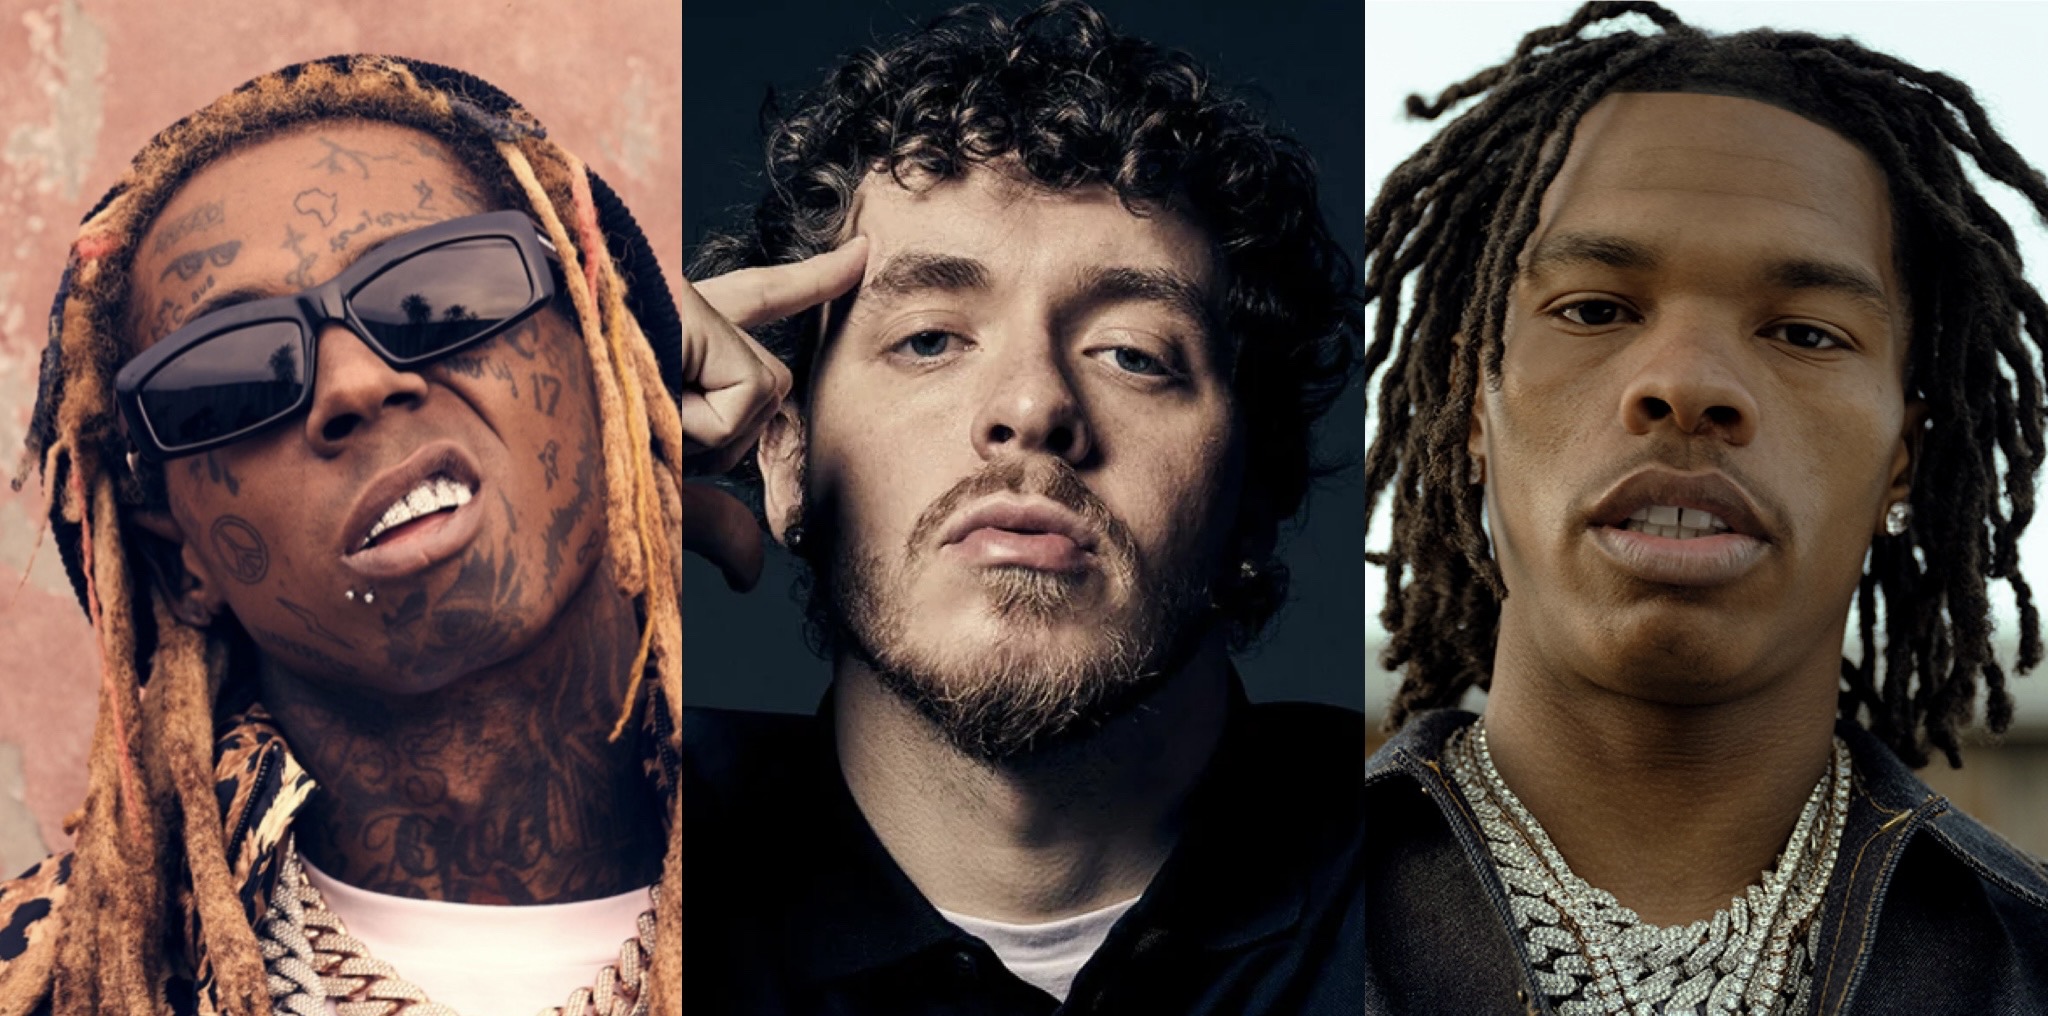 The Headliners Of Montreal's Metro Metro Festival Will Be Lil Wayne, Jack Harlow, And Lil Baby